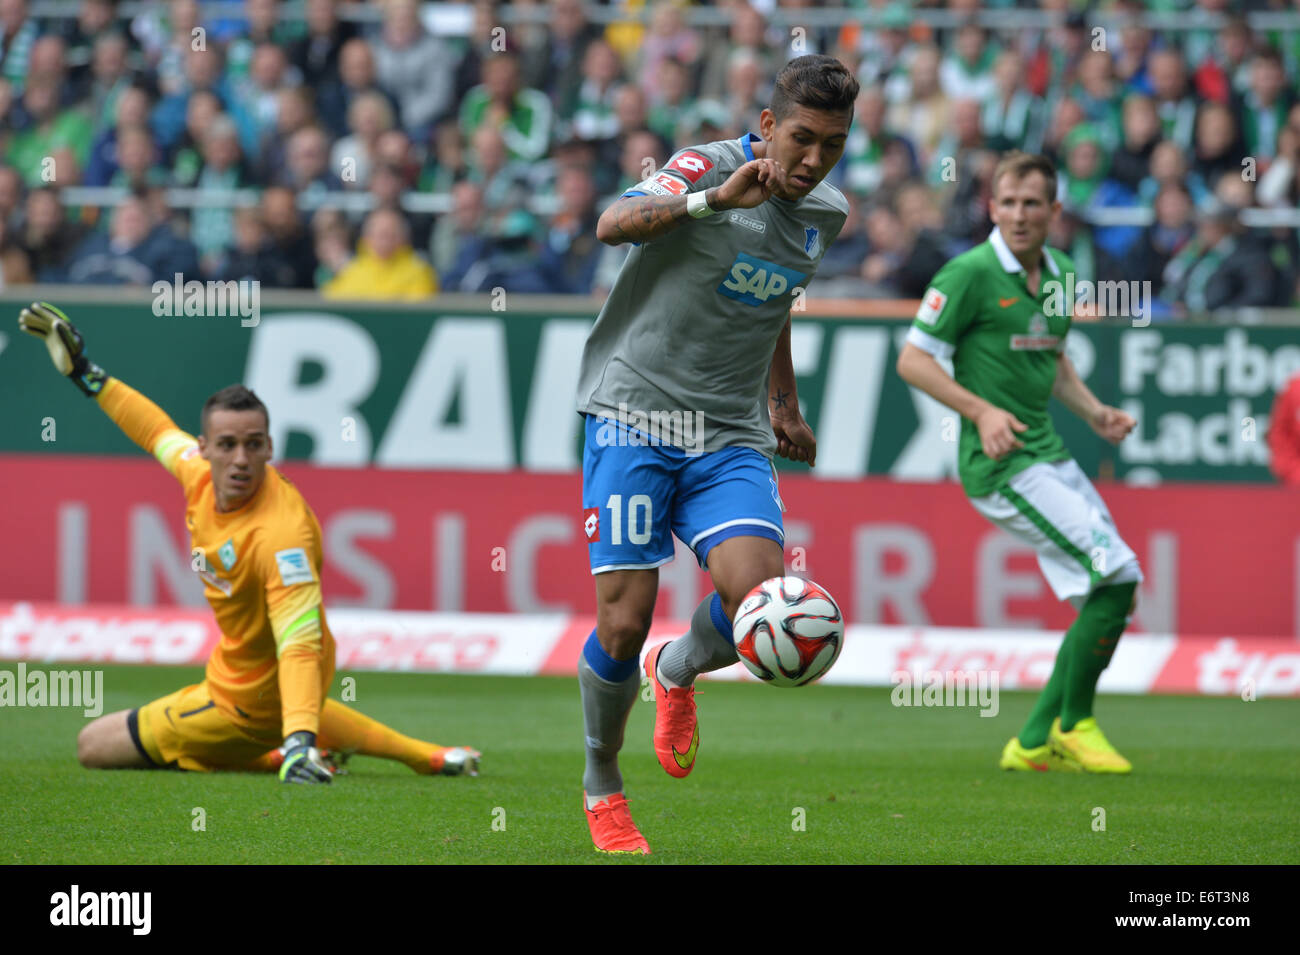 Bremen, Germany. 30th Aug, 2014. Hoffenheim's Roberto Firmino (C) scores 1-0 against Bremen's goal keeper Raphael Wolf (L) and Bremen's Izet Hajrovic (R) during the Bundesliga soccer match between Werder Bremen and TSG 1899 Hoffenheim at Weserstadion in Bremen, Germany, 30 August 2014. Photo: Carmen Jaspersen/dpa (ATTENTION: Due to the accreditation guidelines, the DFL only permits the publication and utilisation of up to 15 pictures per match on the internet and in online media during the match.)/dpa/Alamy Live News Stock Photo